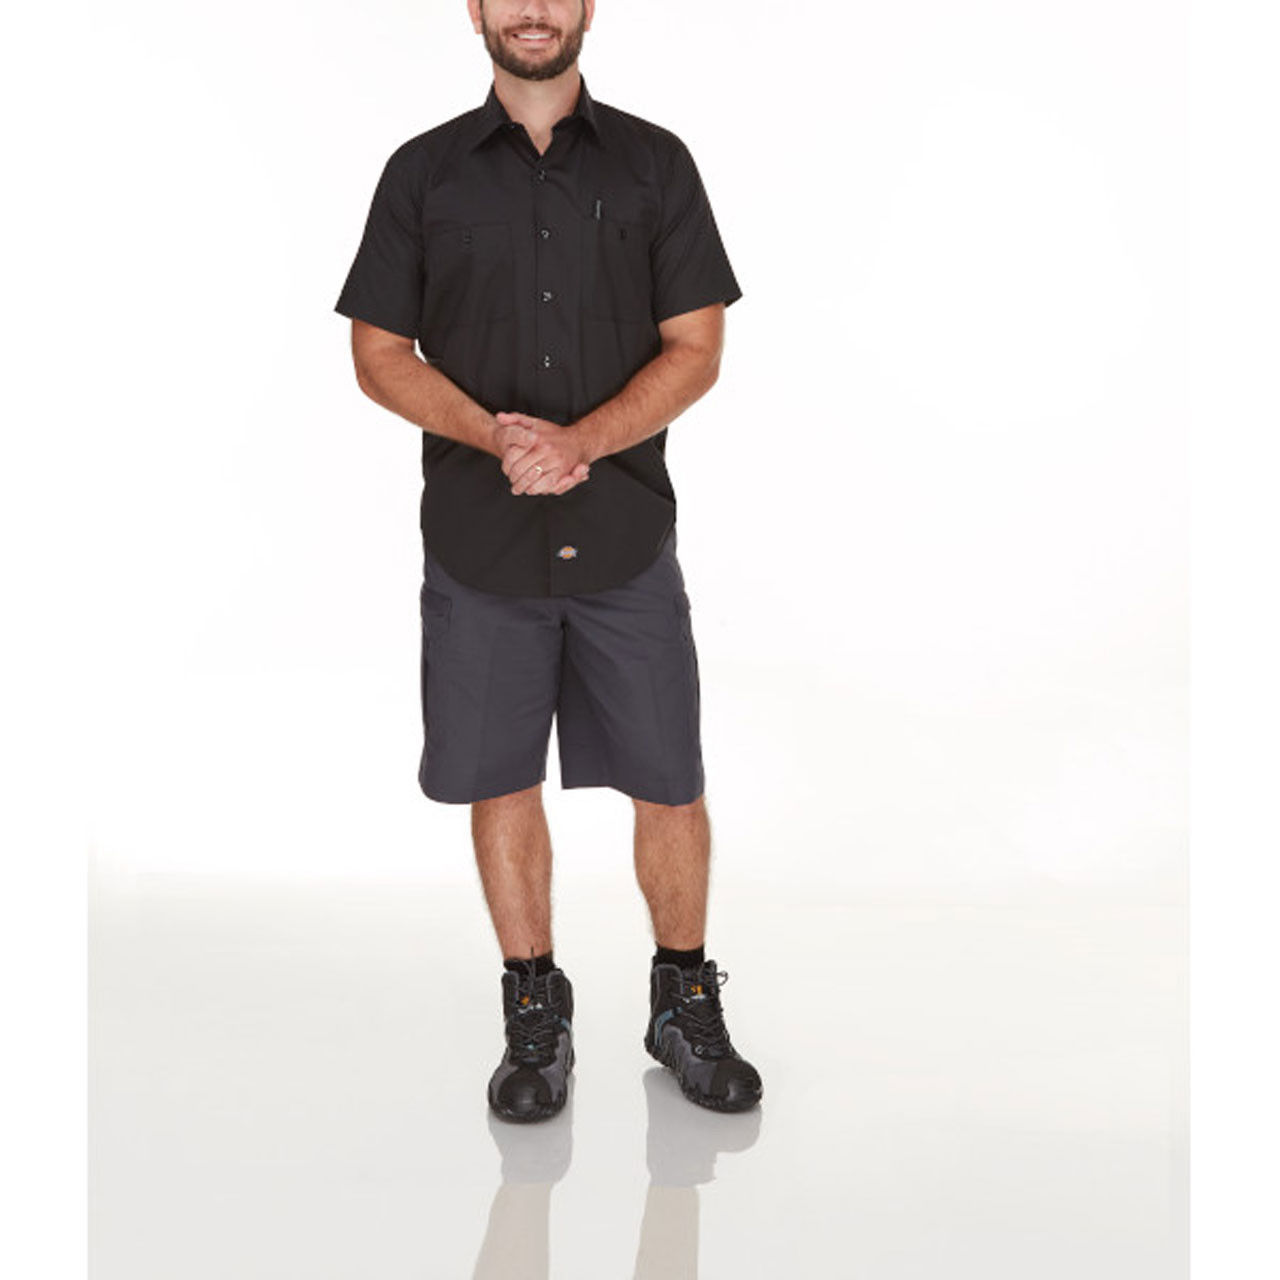 Dickies Cooling Work Shirt - LS51 Questions & Answers